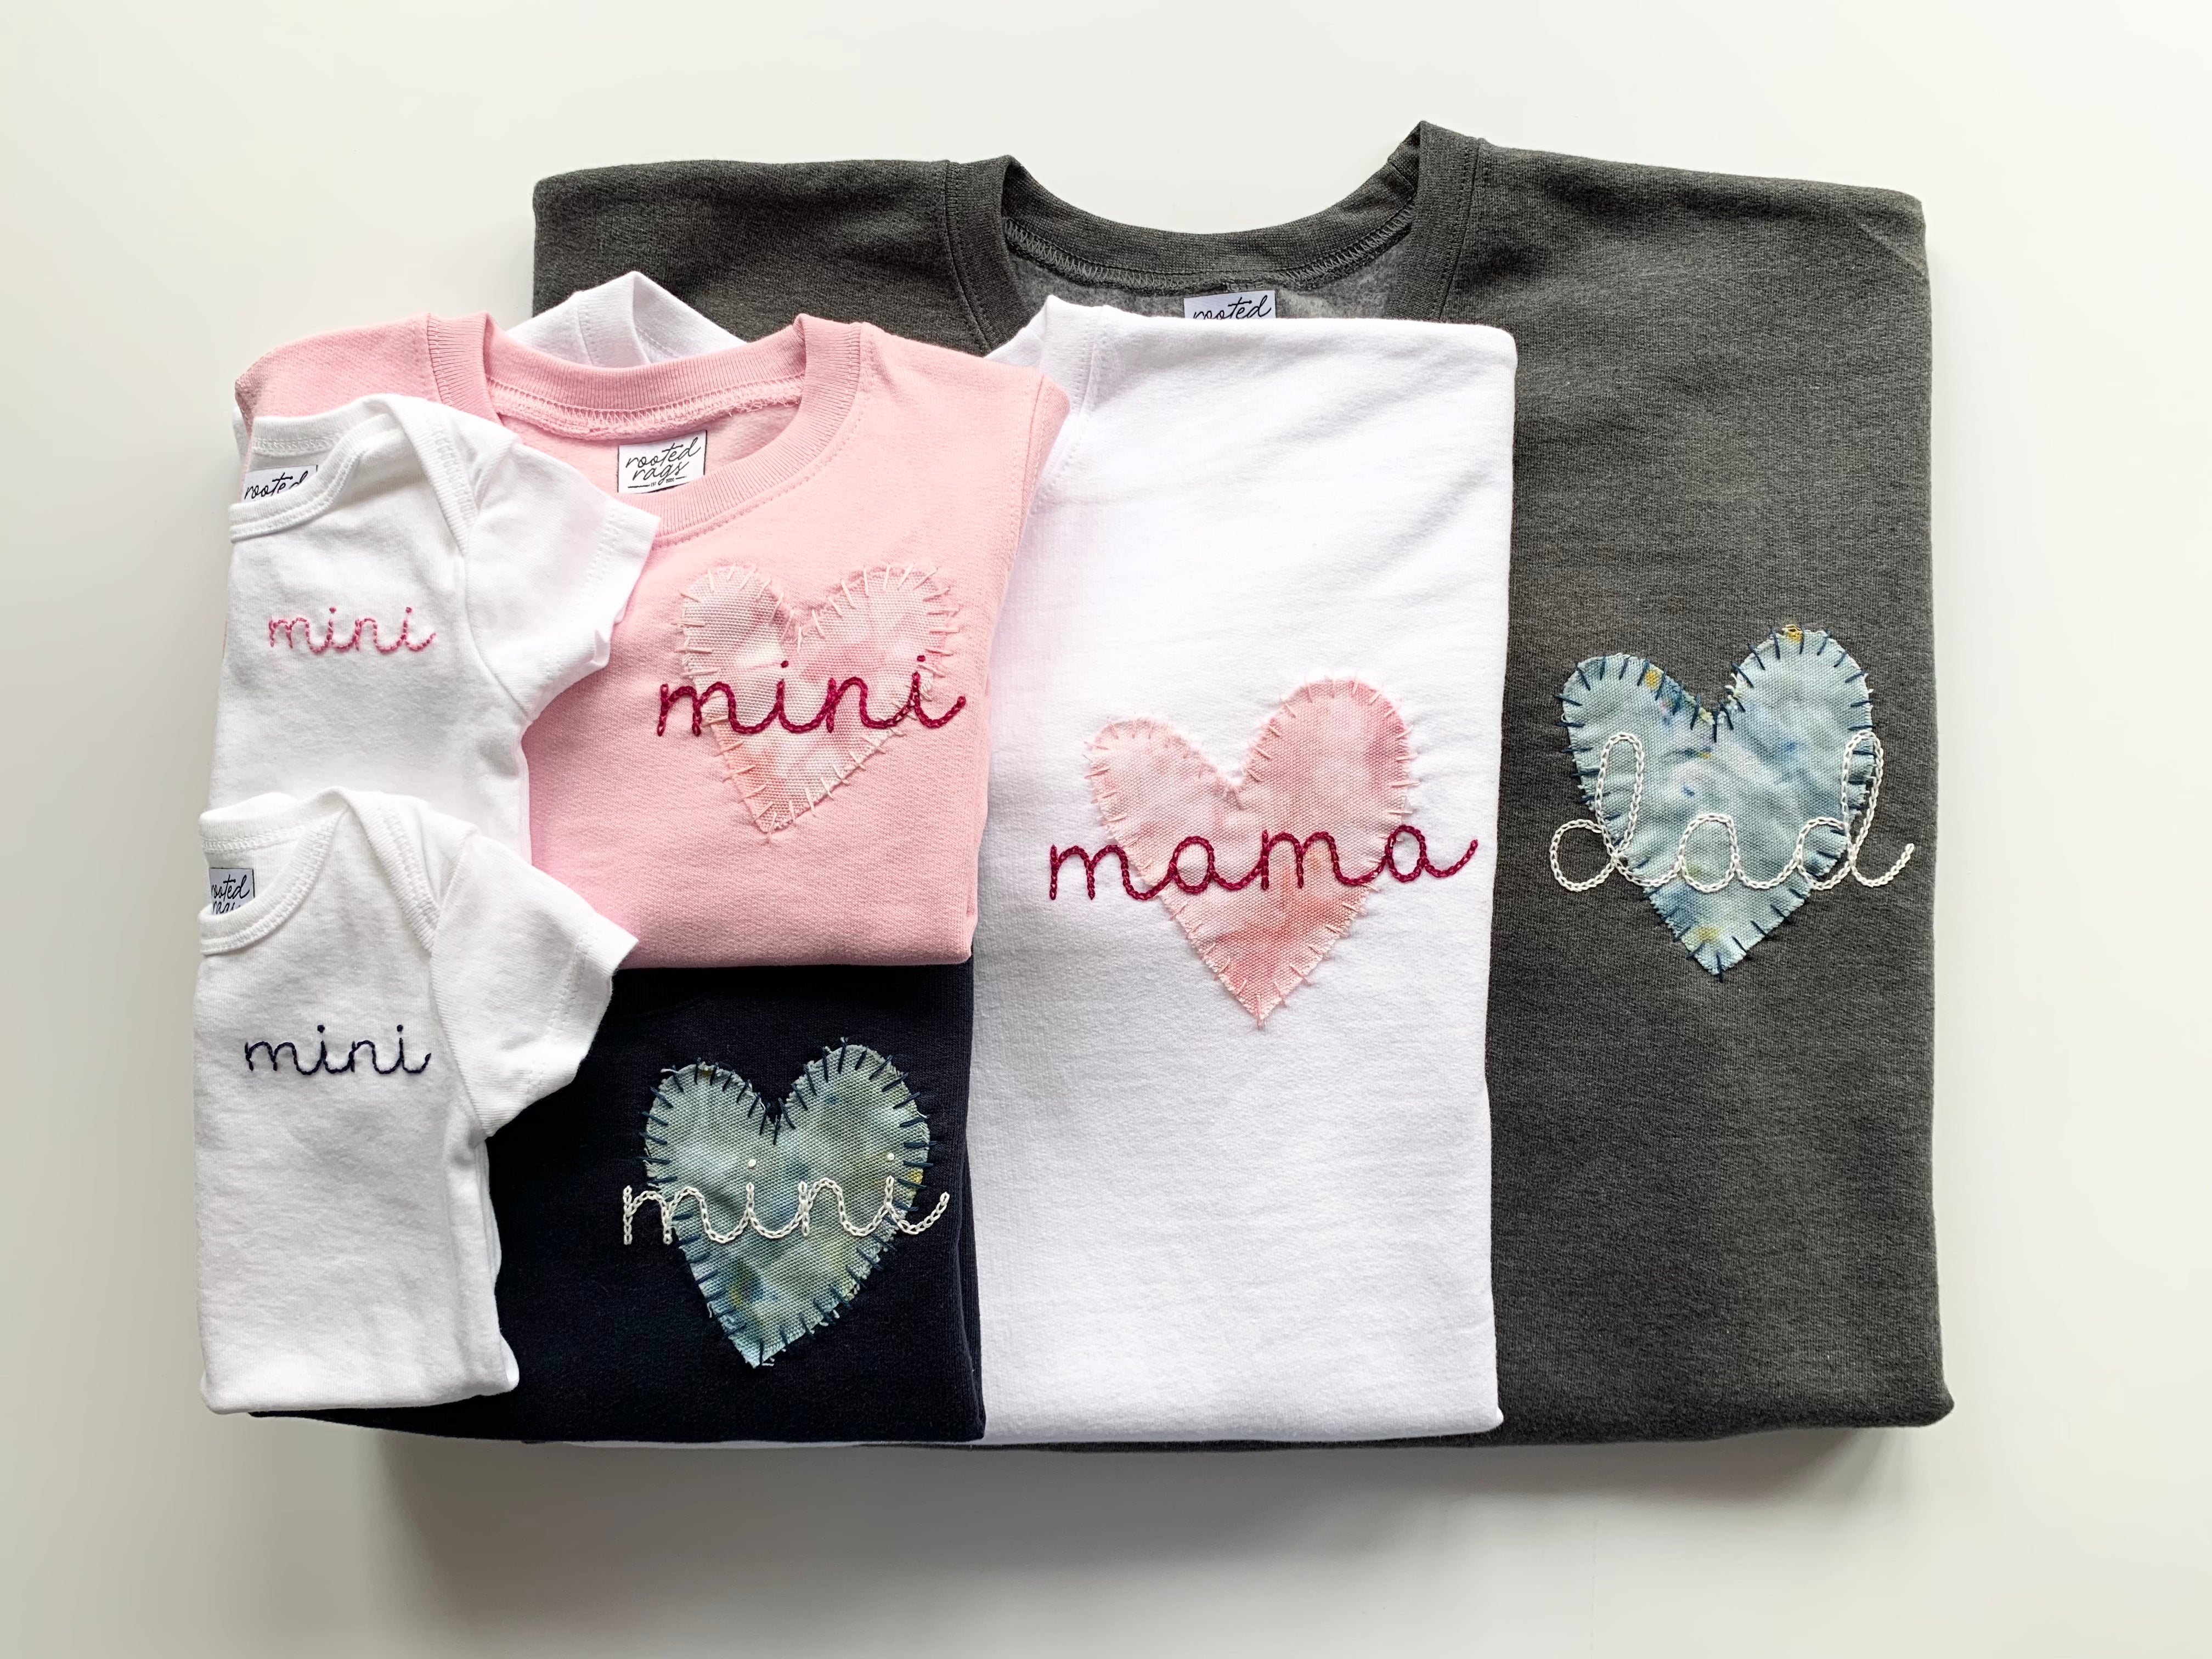 Ice Dyed Heart and Hand Embroidered Adult or Kids' T-Shirt